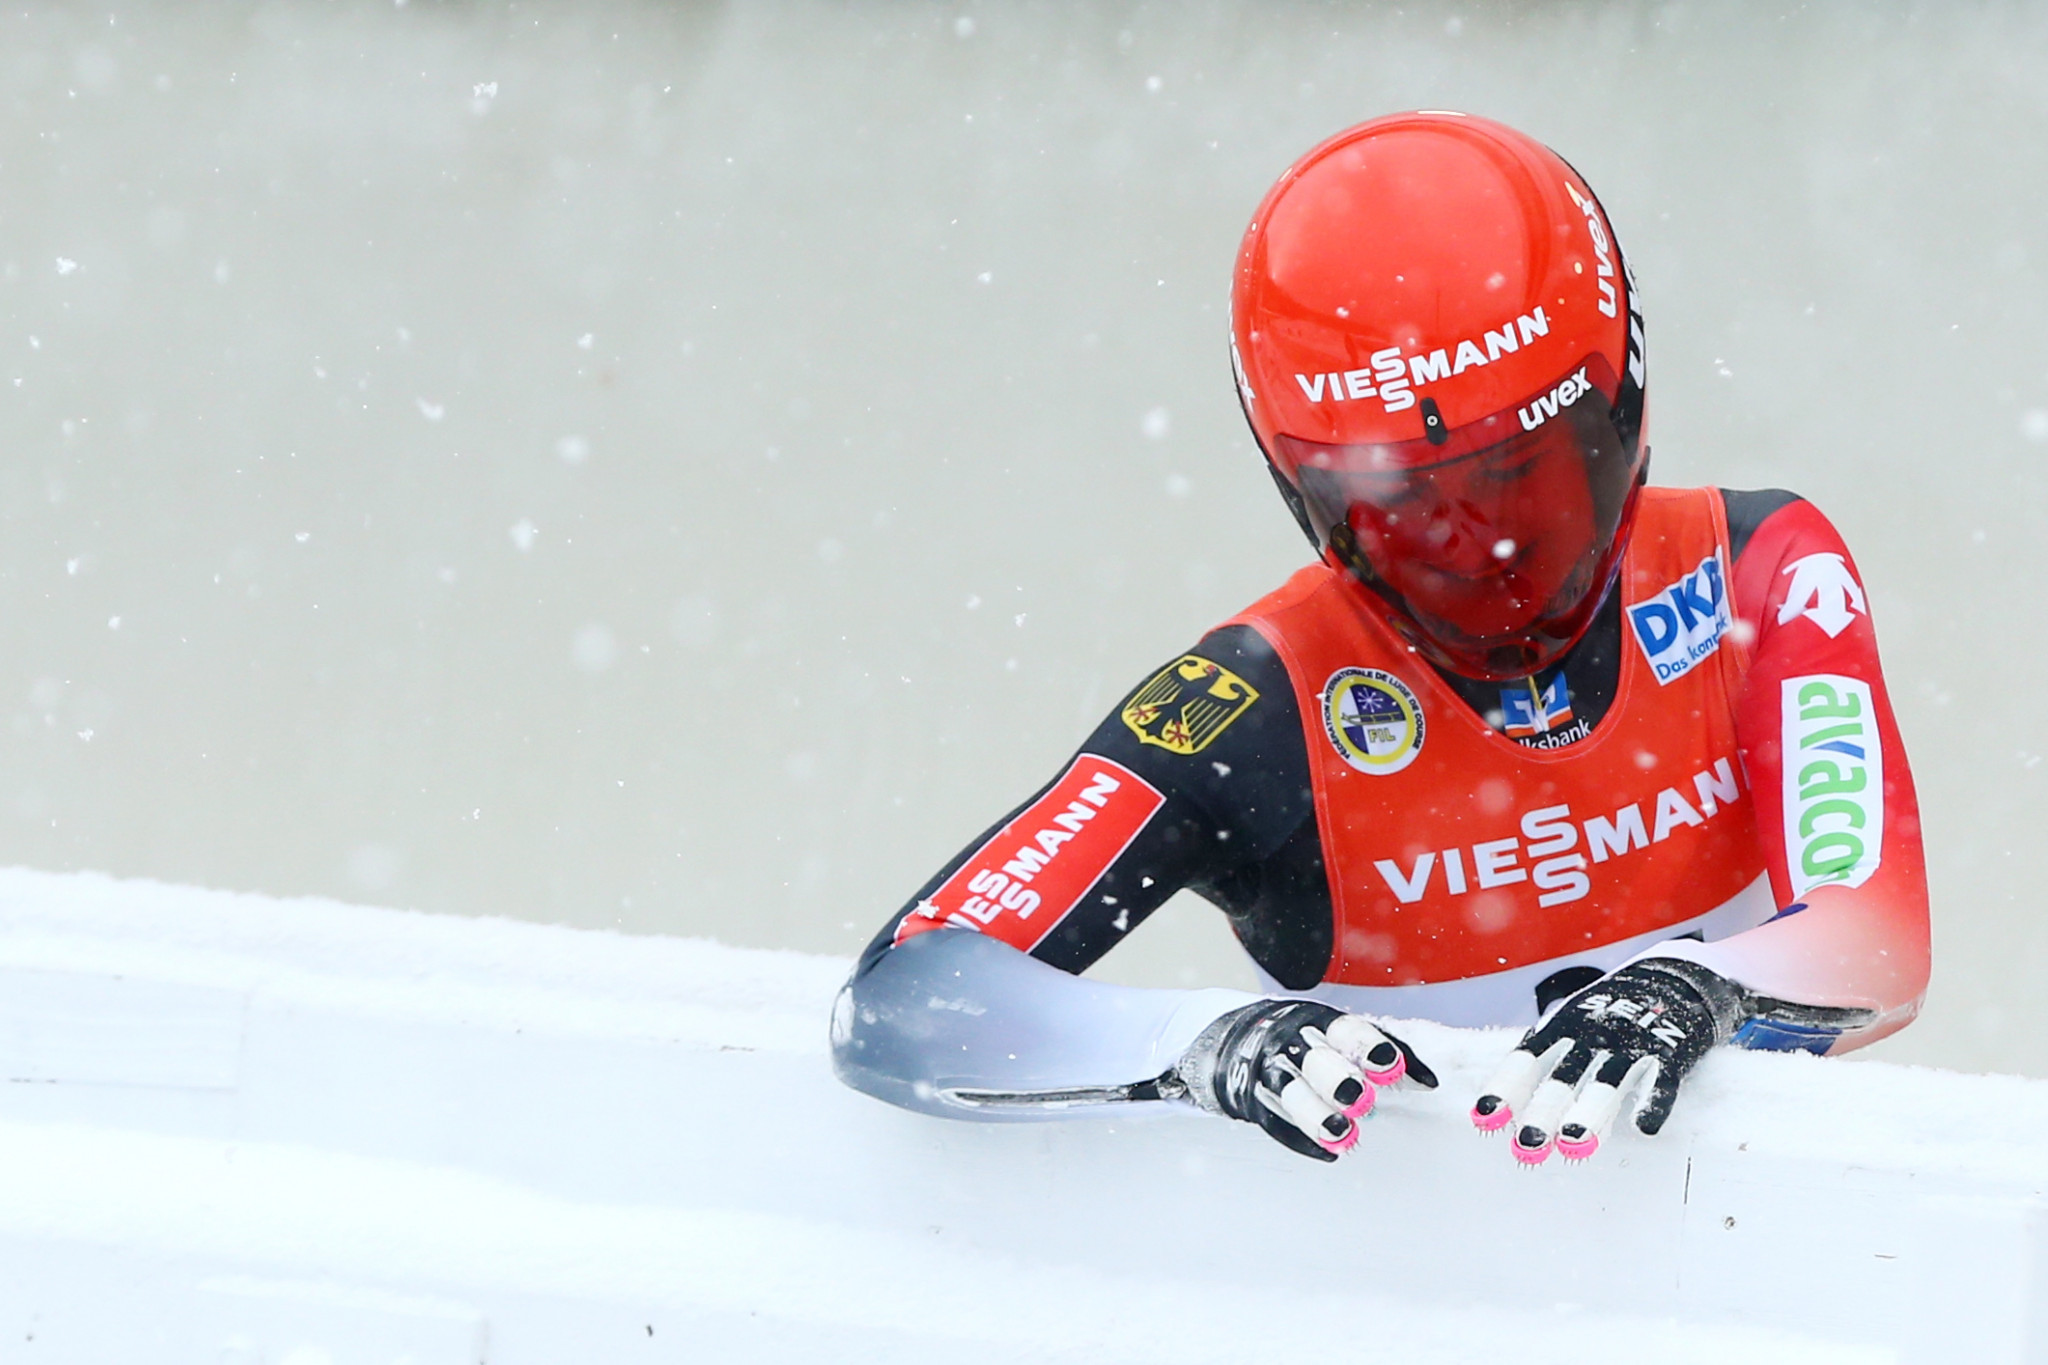 Taubitz closes on Luge World Cup leader after triumphing in Königssee